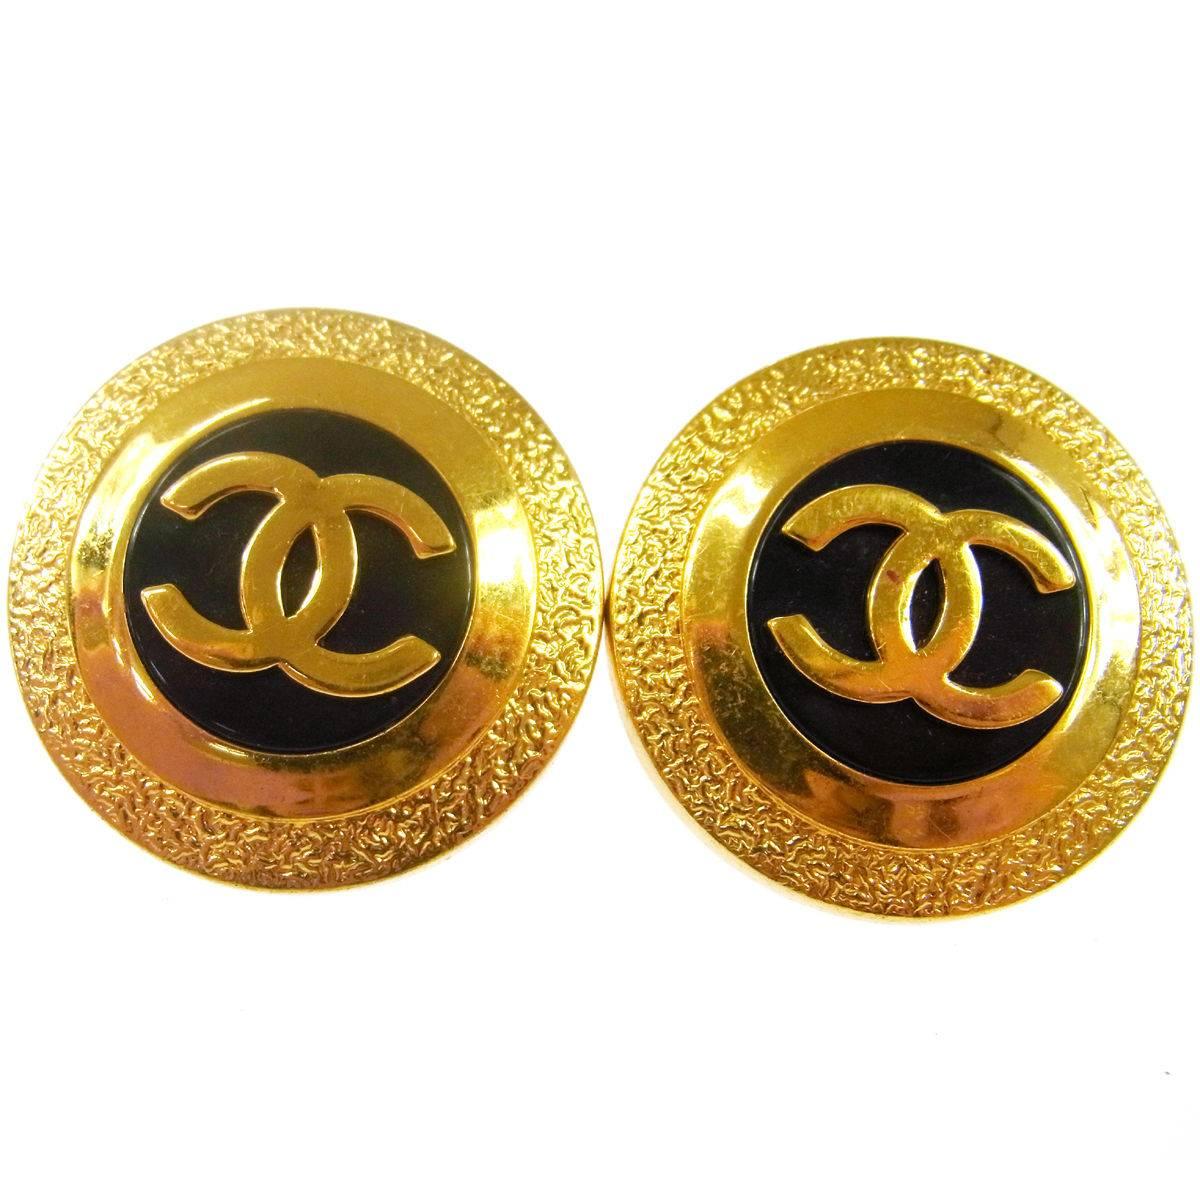 Chanel Gold Round Large Statement Evening Disc Stud Earrings in Box